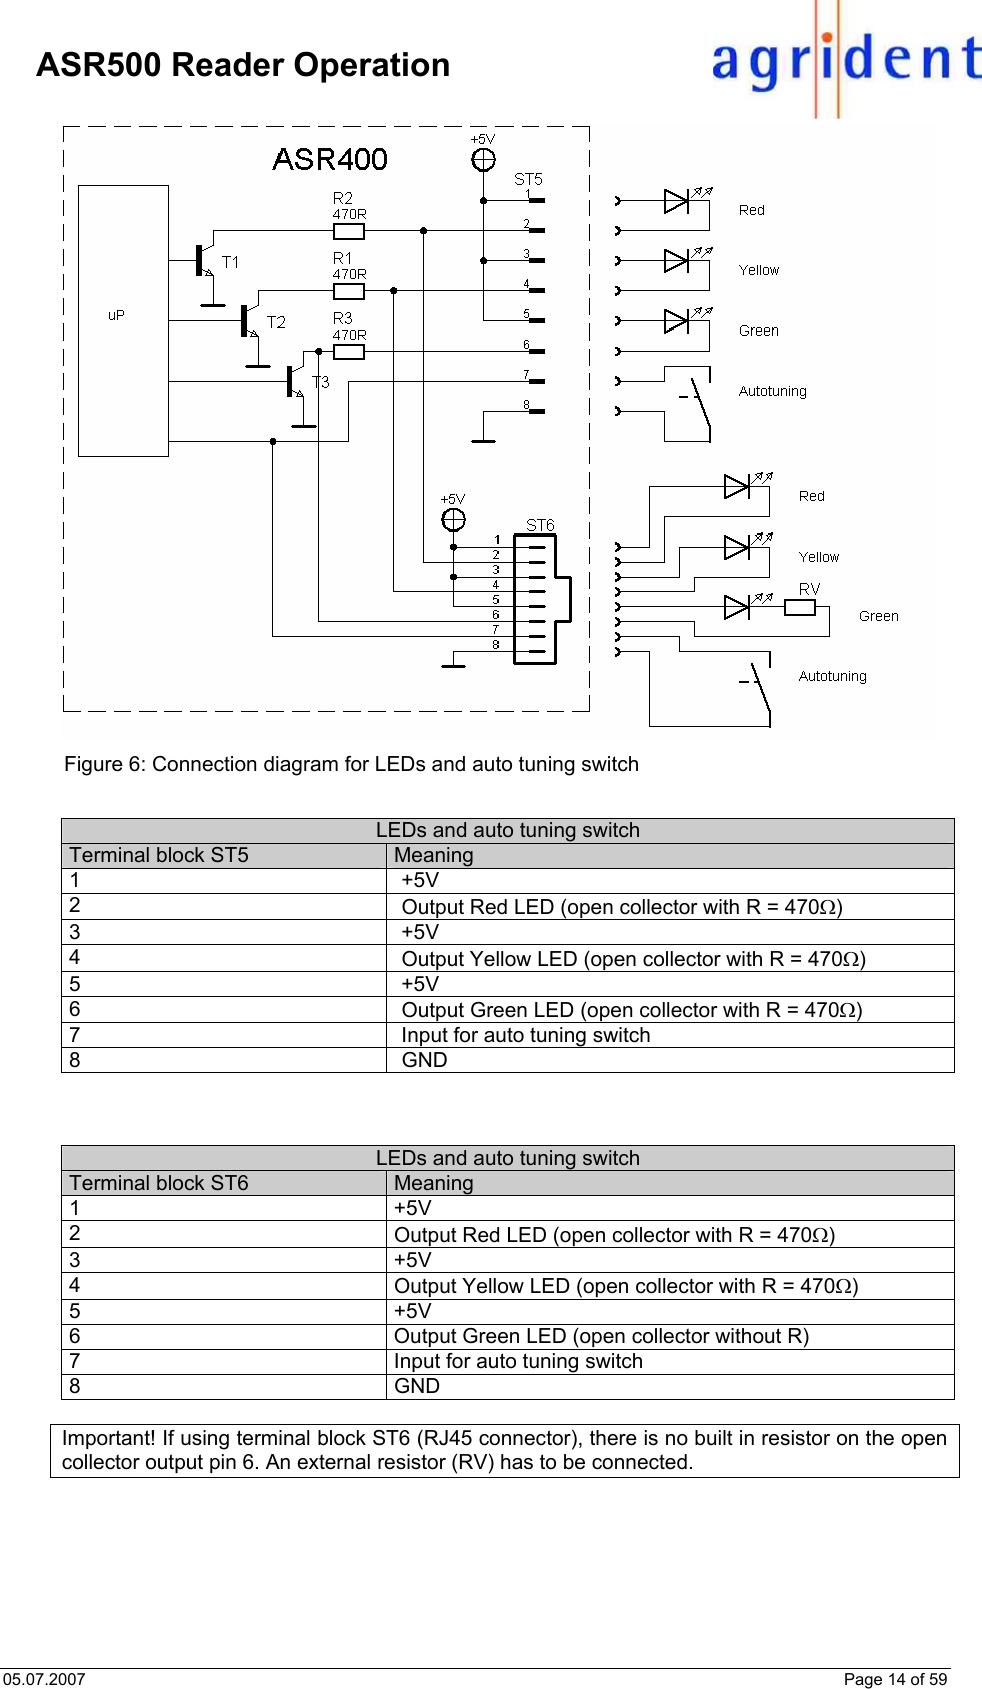 05.07.2007    Page 14 of 59     ASR500 Reader Operation  Figure 6: Connection diagram for LEDs and auto tuning switch  LEDs and auto tuning switch Terminal block ST5  Meaning 1 +5V 2  Output Red LED (open collector with R = 470Ω) 3 +5V 4  Output Yellow LED (open collector with R = 470Ω) 5 +5V 6  Output Green LED (open collector with R = 470Ω) 7  Input for auto tuning switch 8 GND    LEDs and auto tuning switch Terminal block ST6  Meaning 1 +5V 2  Output Red LED (open collector with R = 470Ω) 3 +5V 4  Output Yellow LED (open collector with R = 470Ω) 5 +5V 6  Output Green LED (open collector without R) 7  Input for auto tuning switch 8 GND  Important! If using terminal block ST6 (RJ45 connector), there is no built in resistor on the open collector output pin 6. An external resistor (RV) has to be connected.  